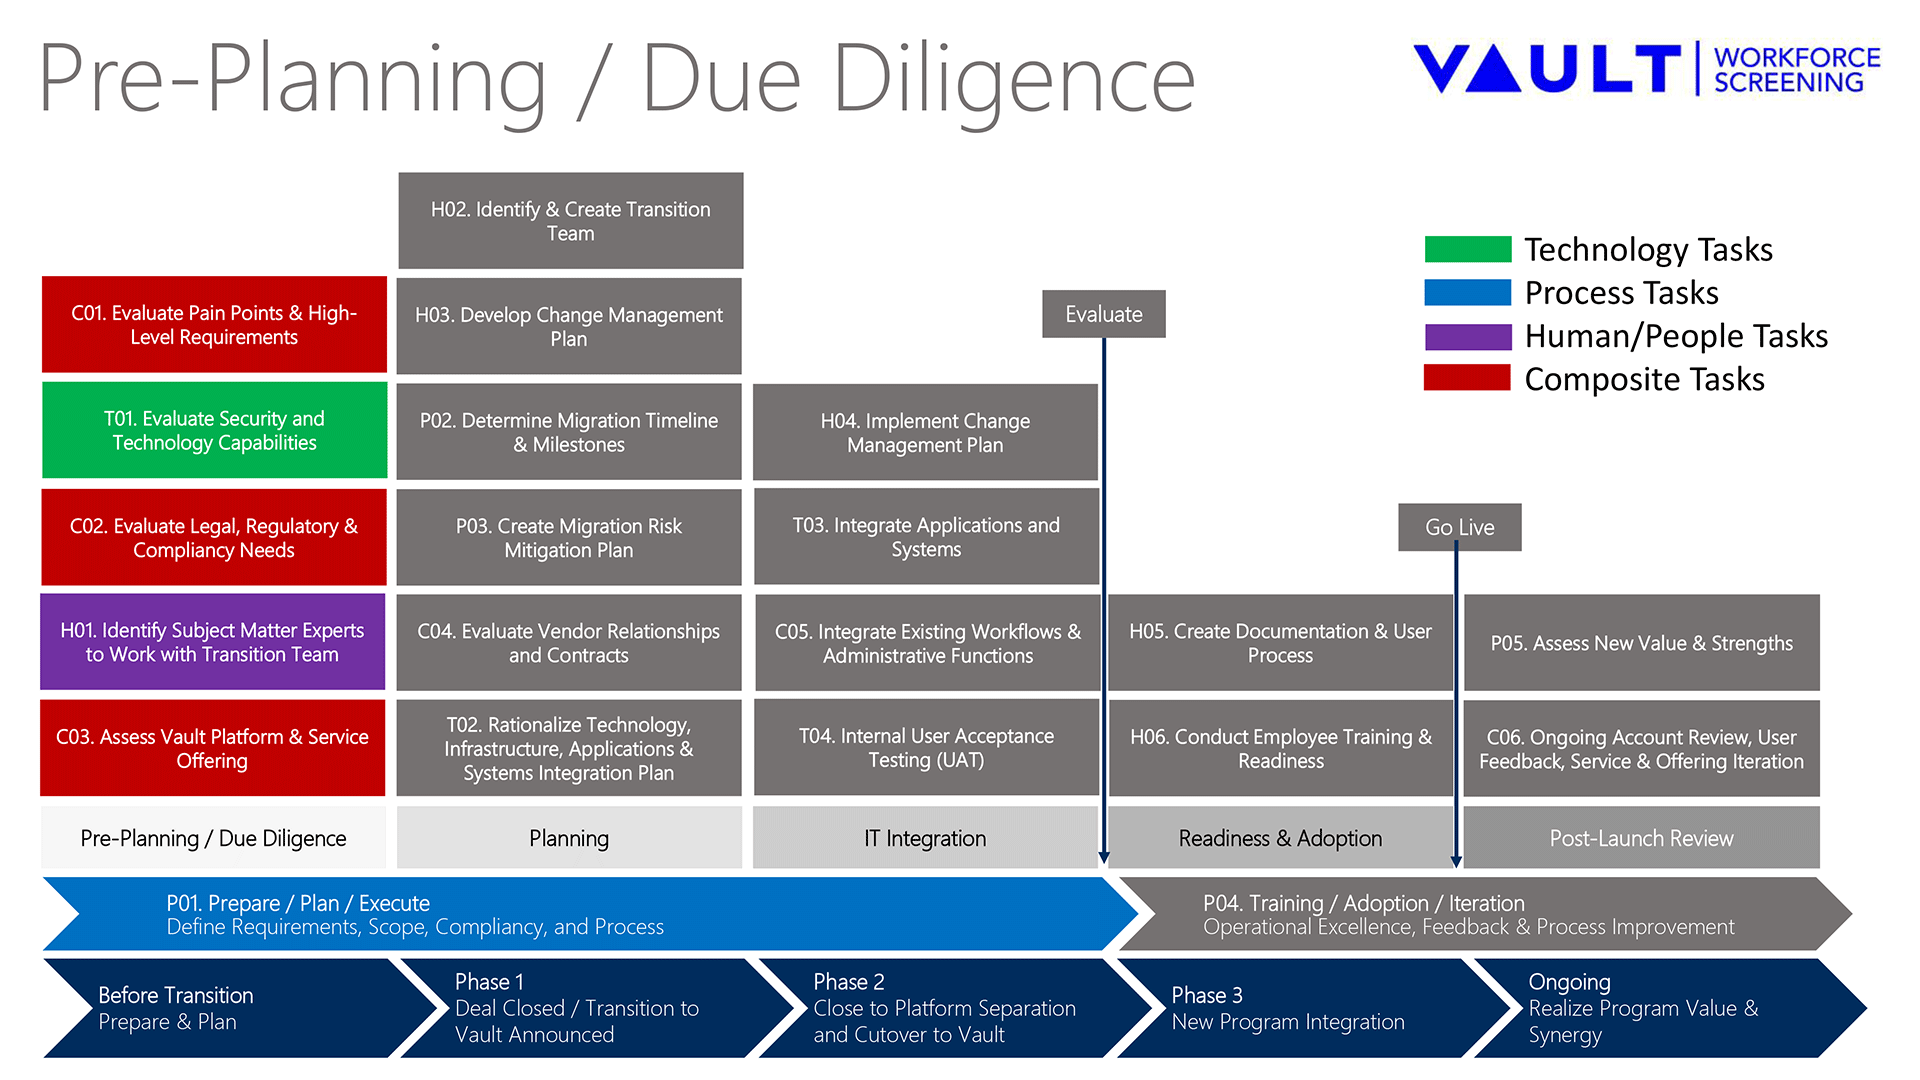 Pre- Planning and Due Diligence Graphic from Vault 